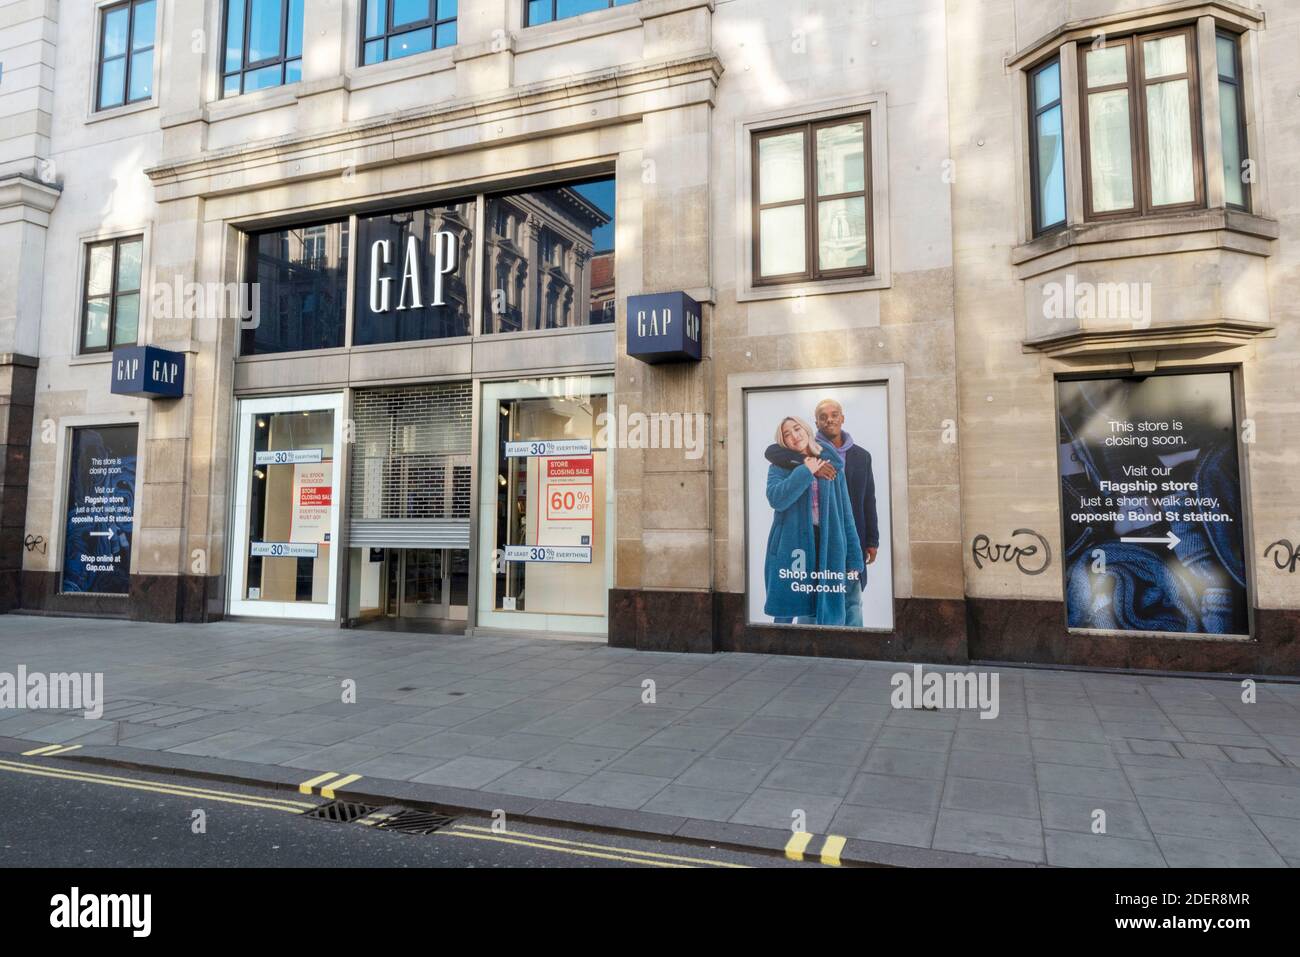 Every Gap store that has closed between 2020 and today - see full